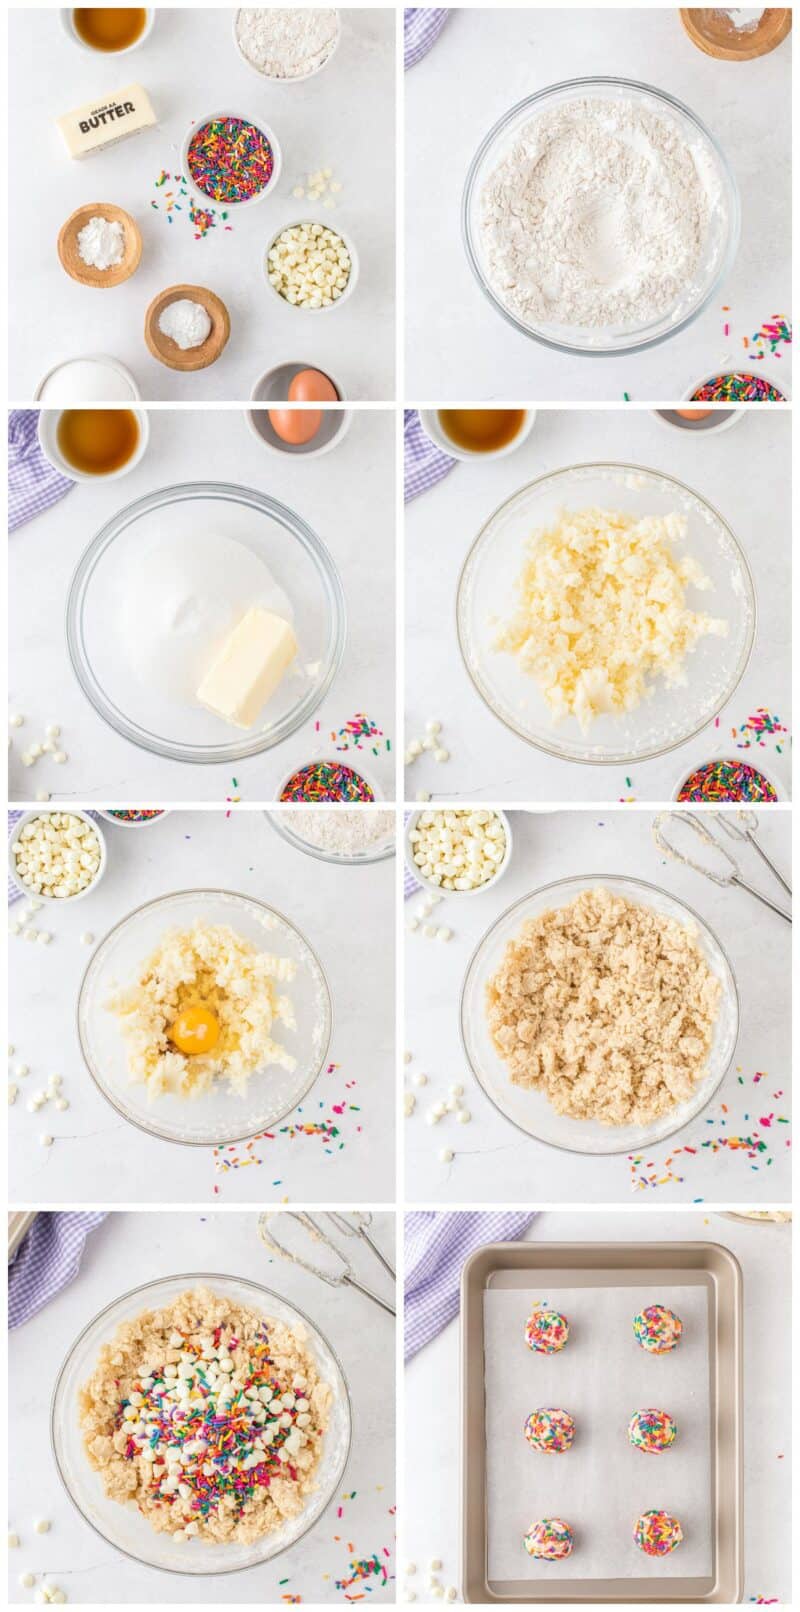 how to make funfetti cookies step by step recipe photos